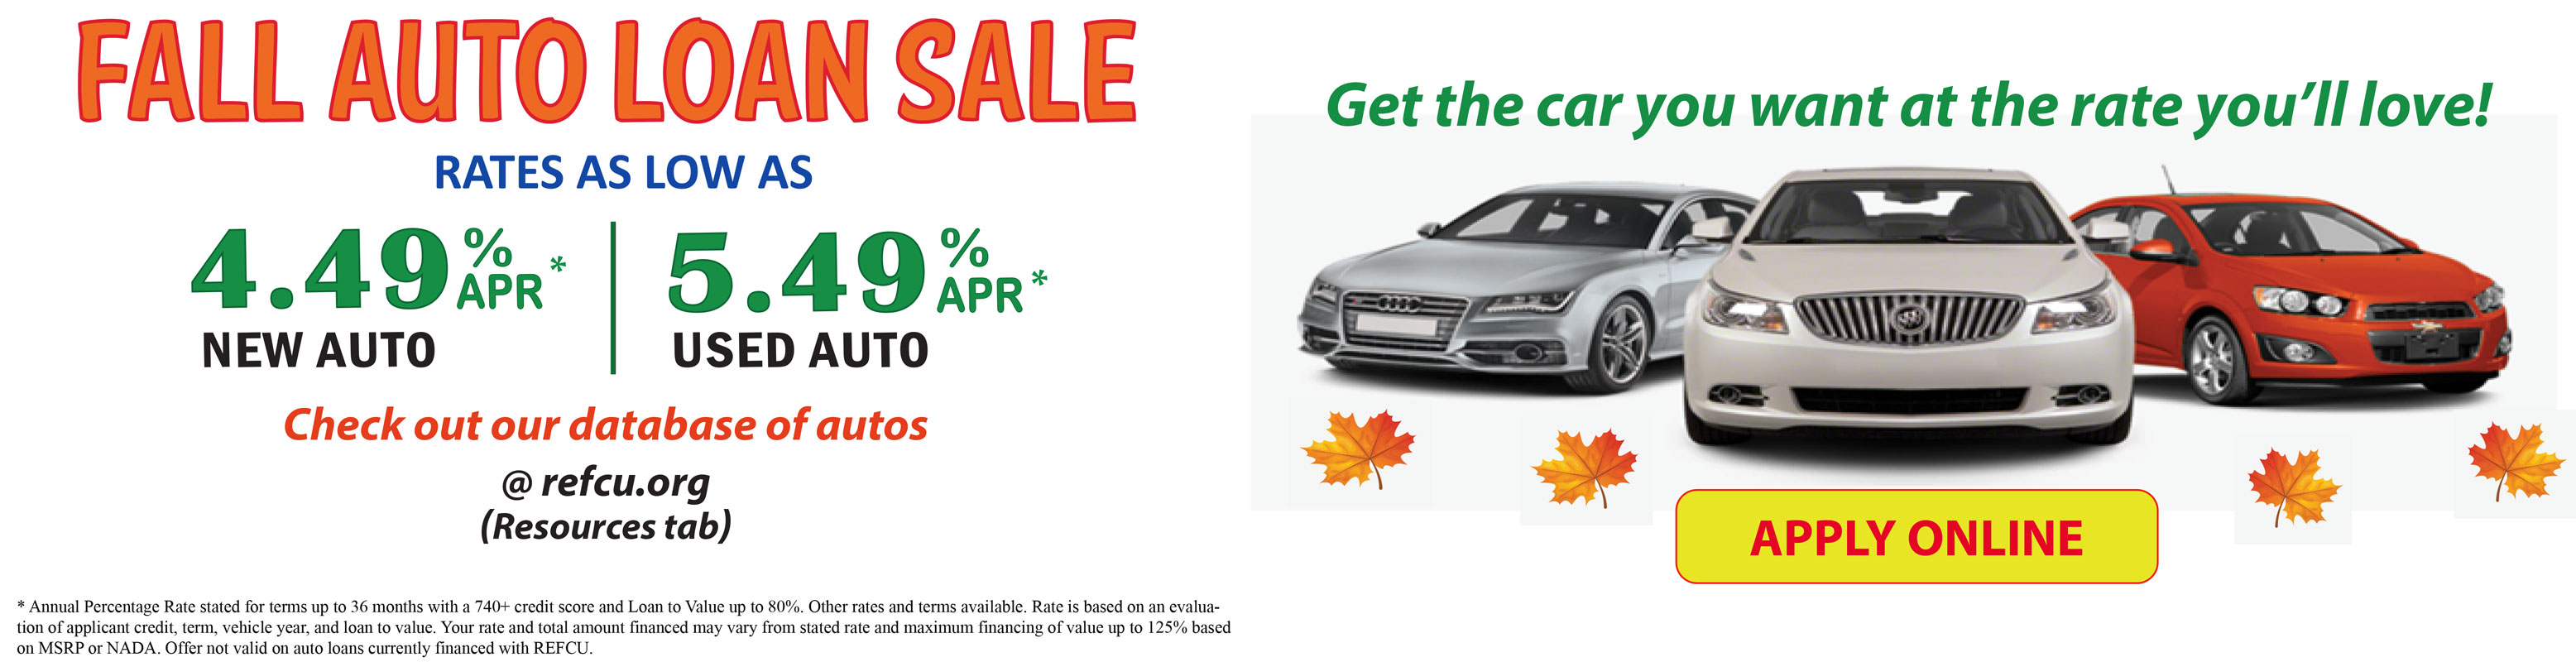 Fall auto loan sale. Rates as low as 4.49% APR